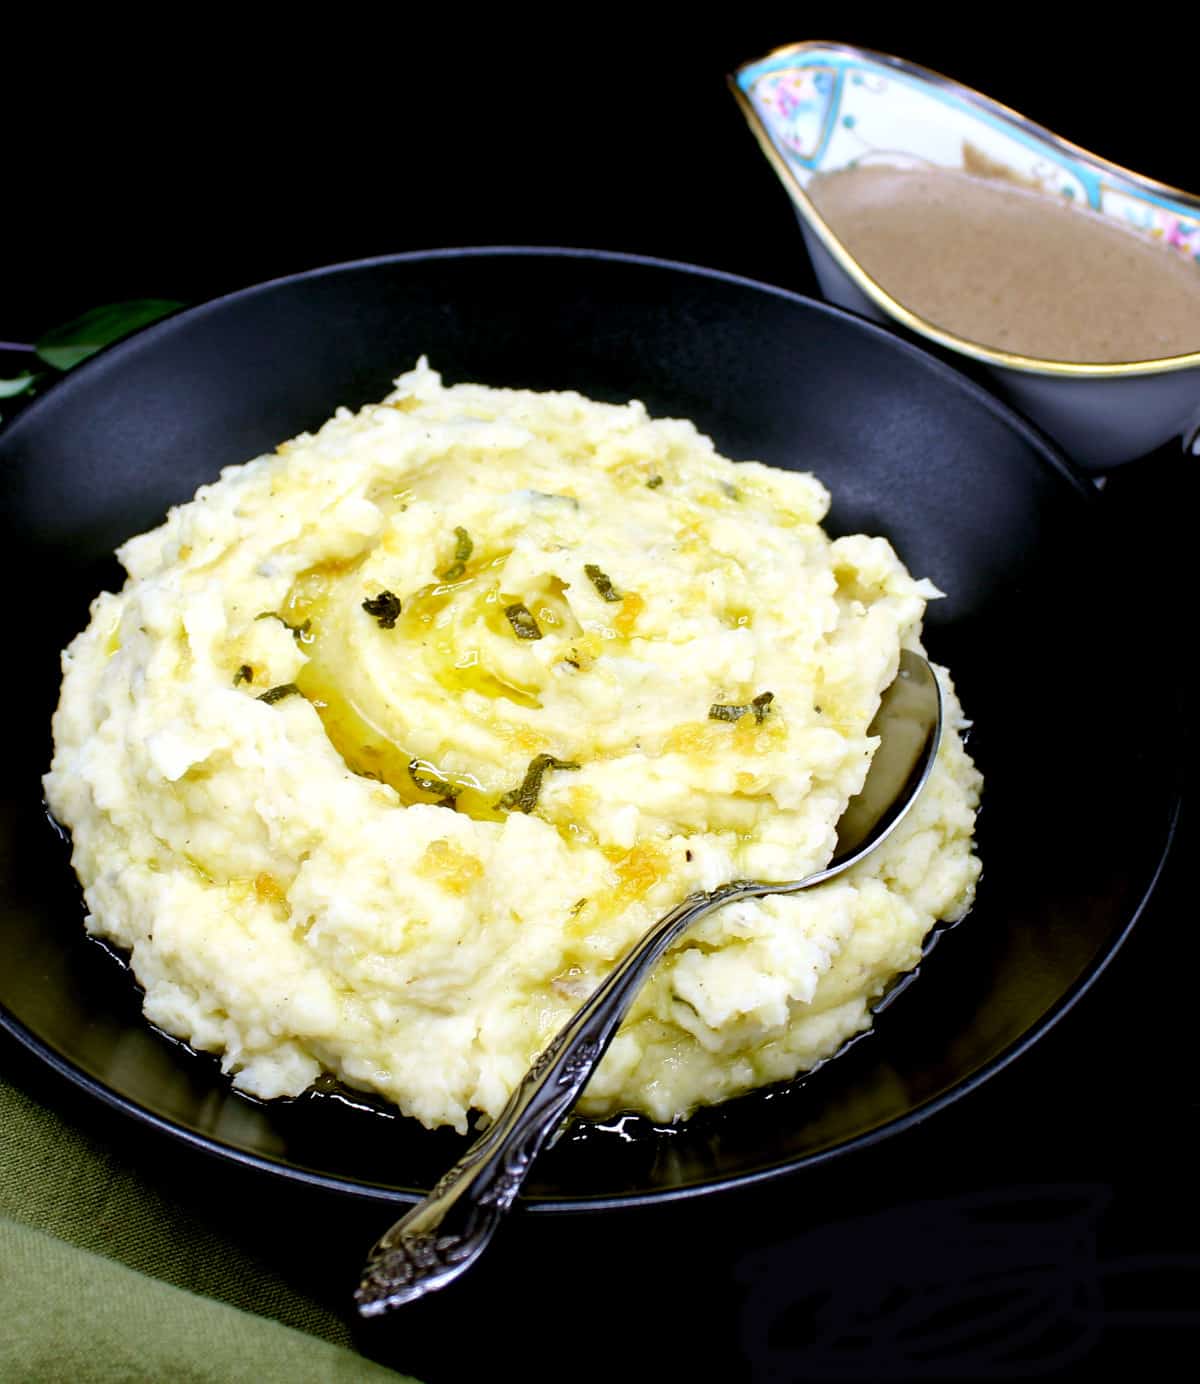 Vegan Instant Pot mashed potatoes in bowl with spoon.